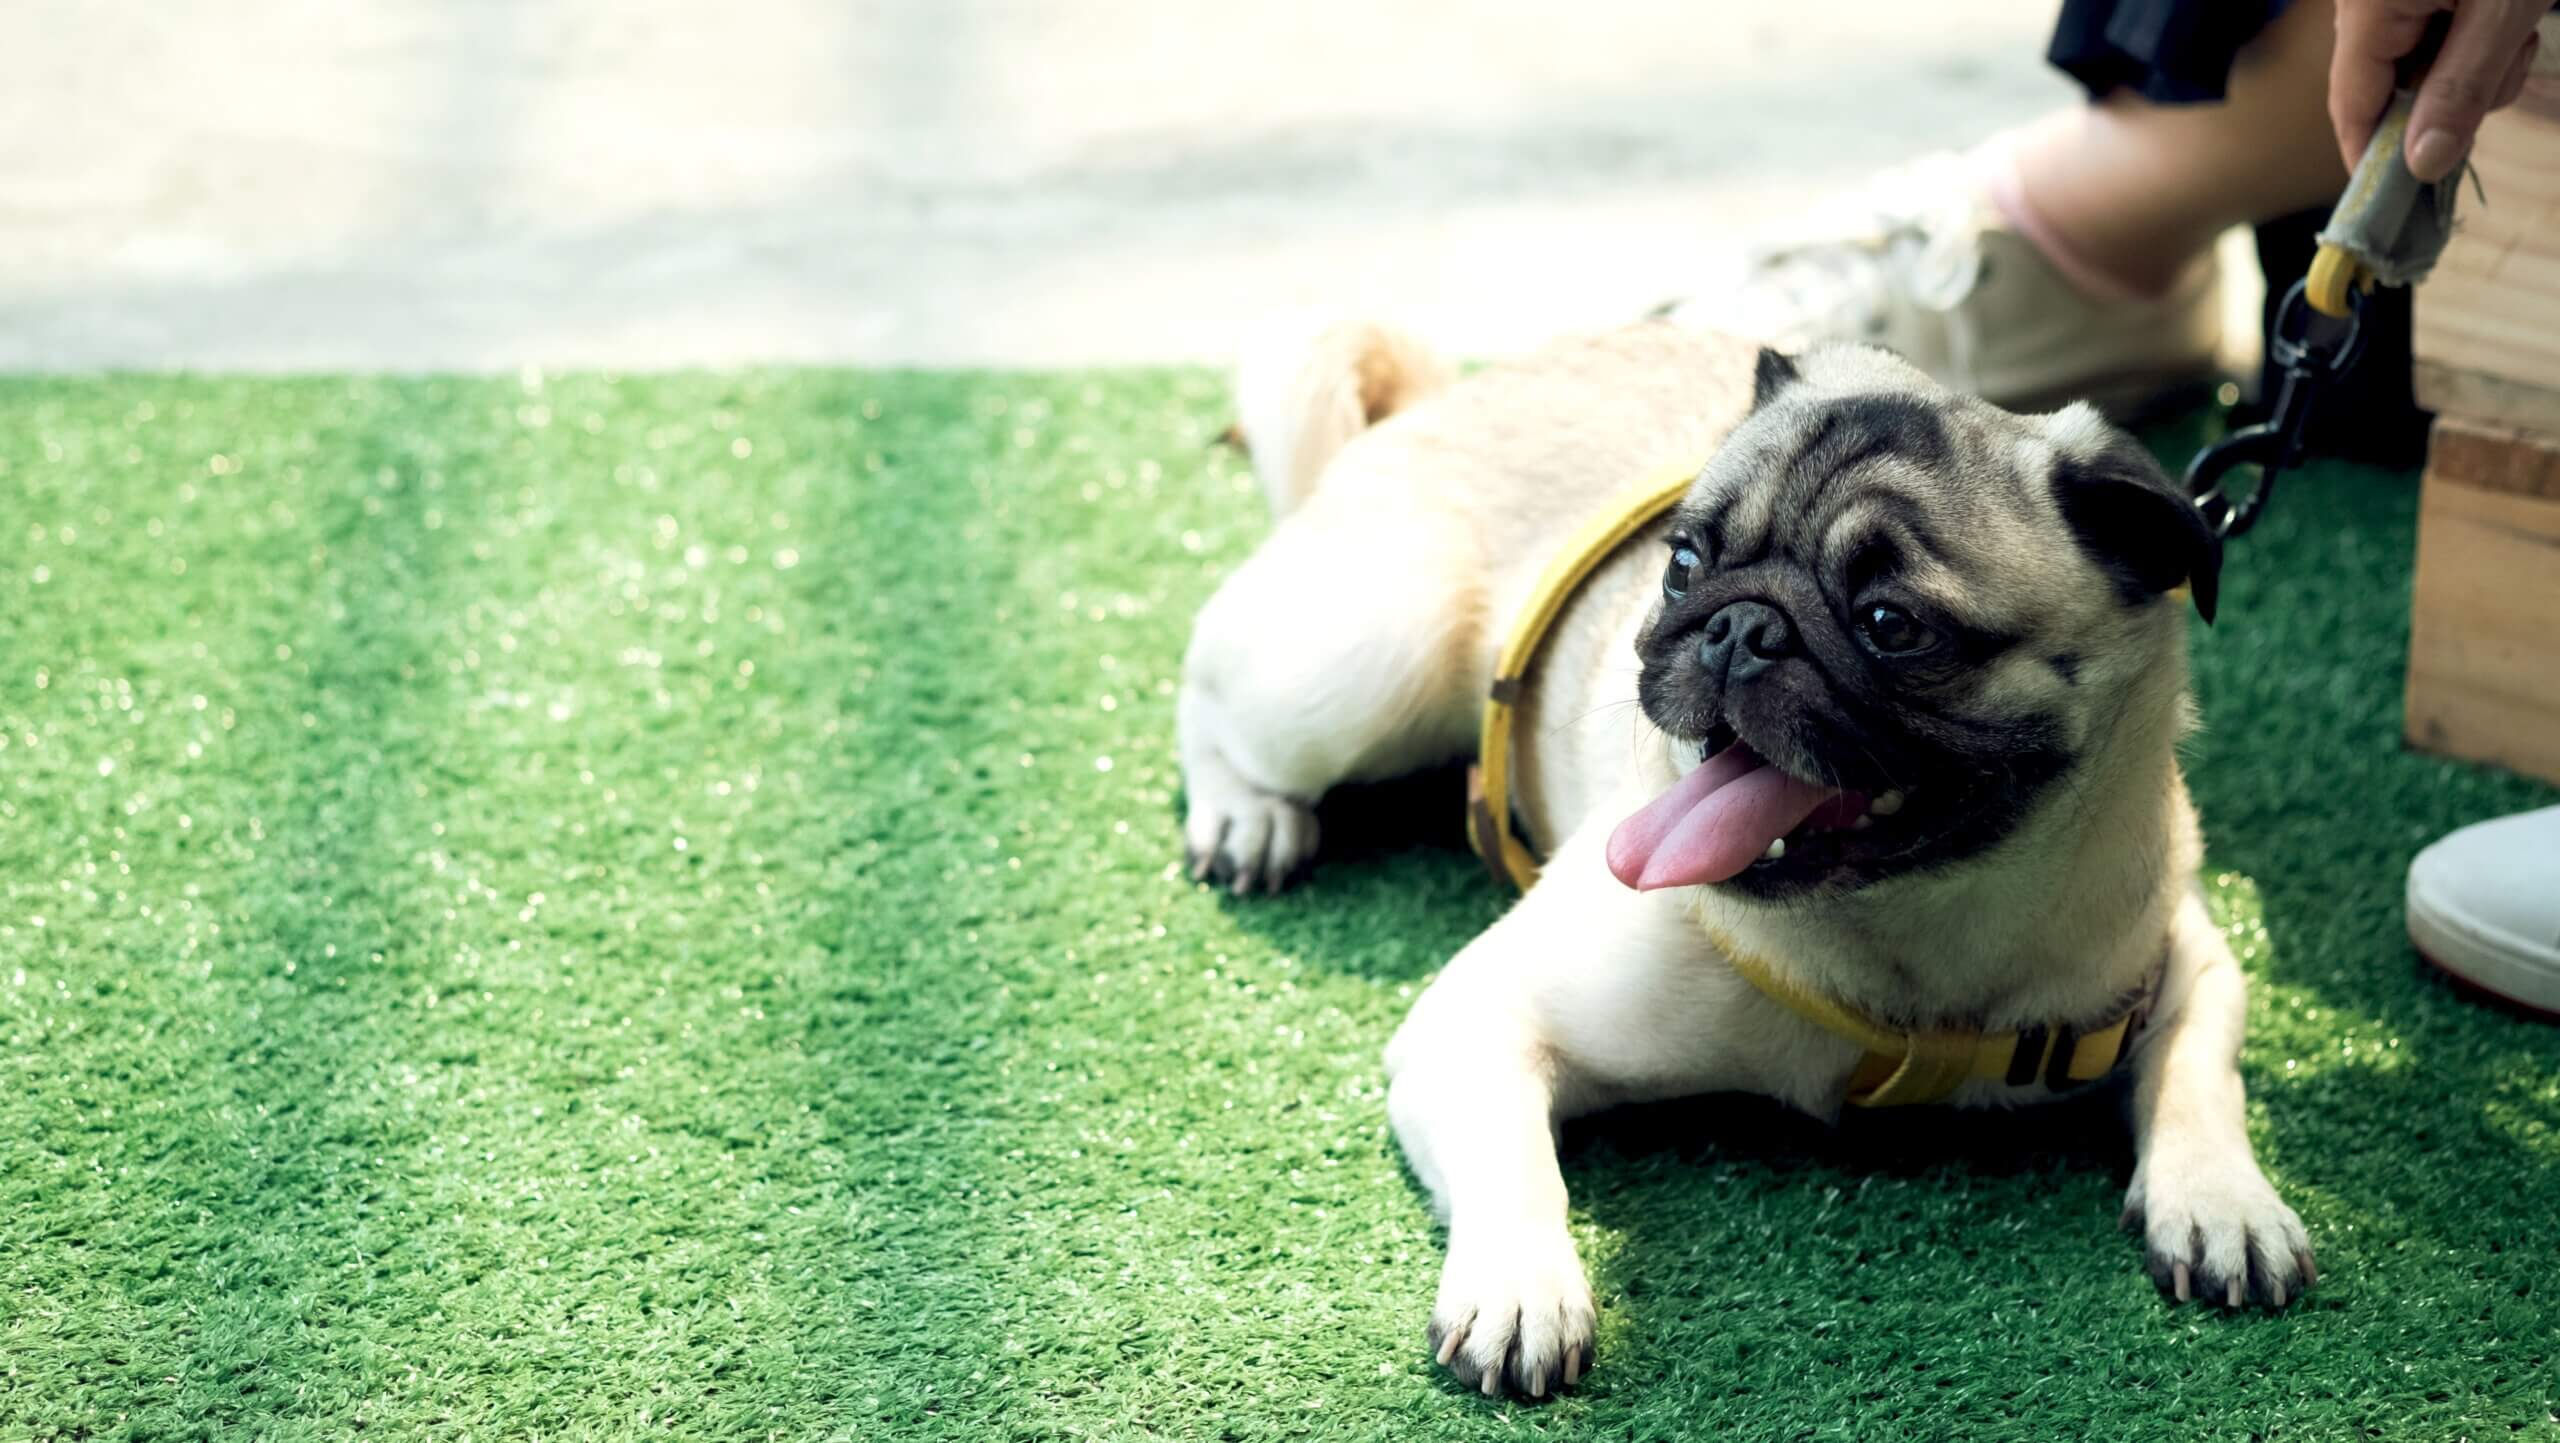 pug dog resting on artificial grass